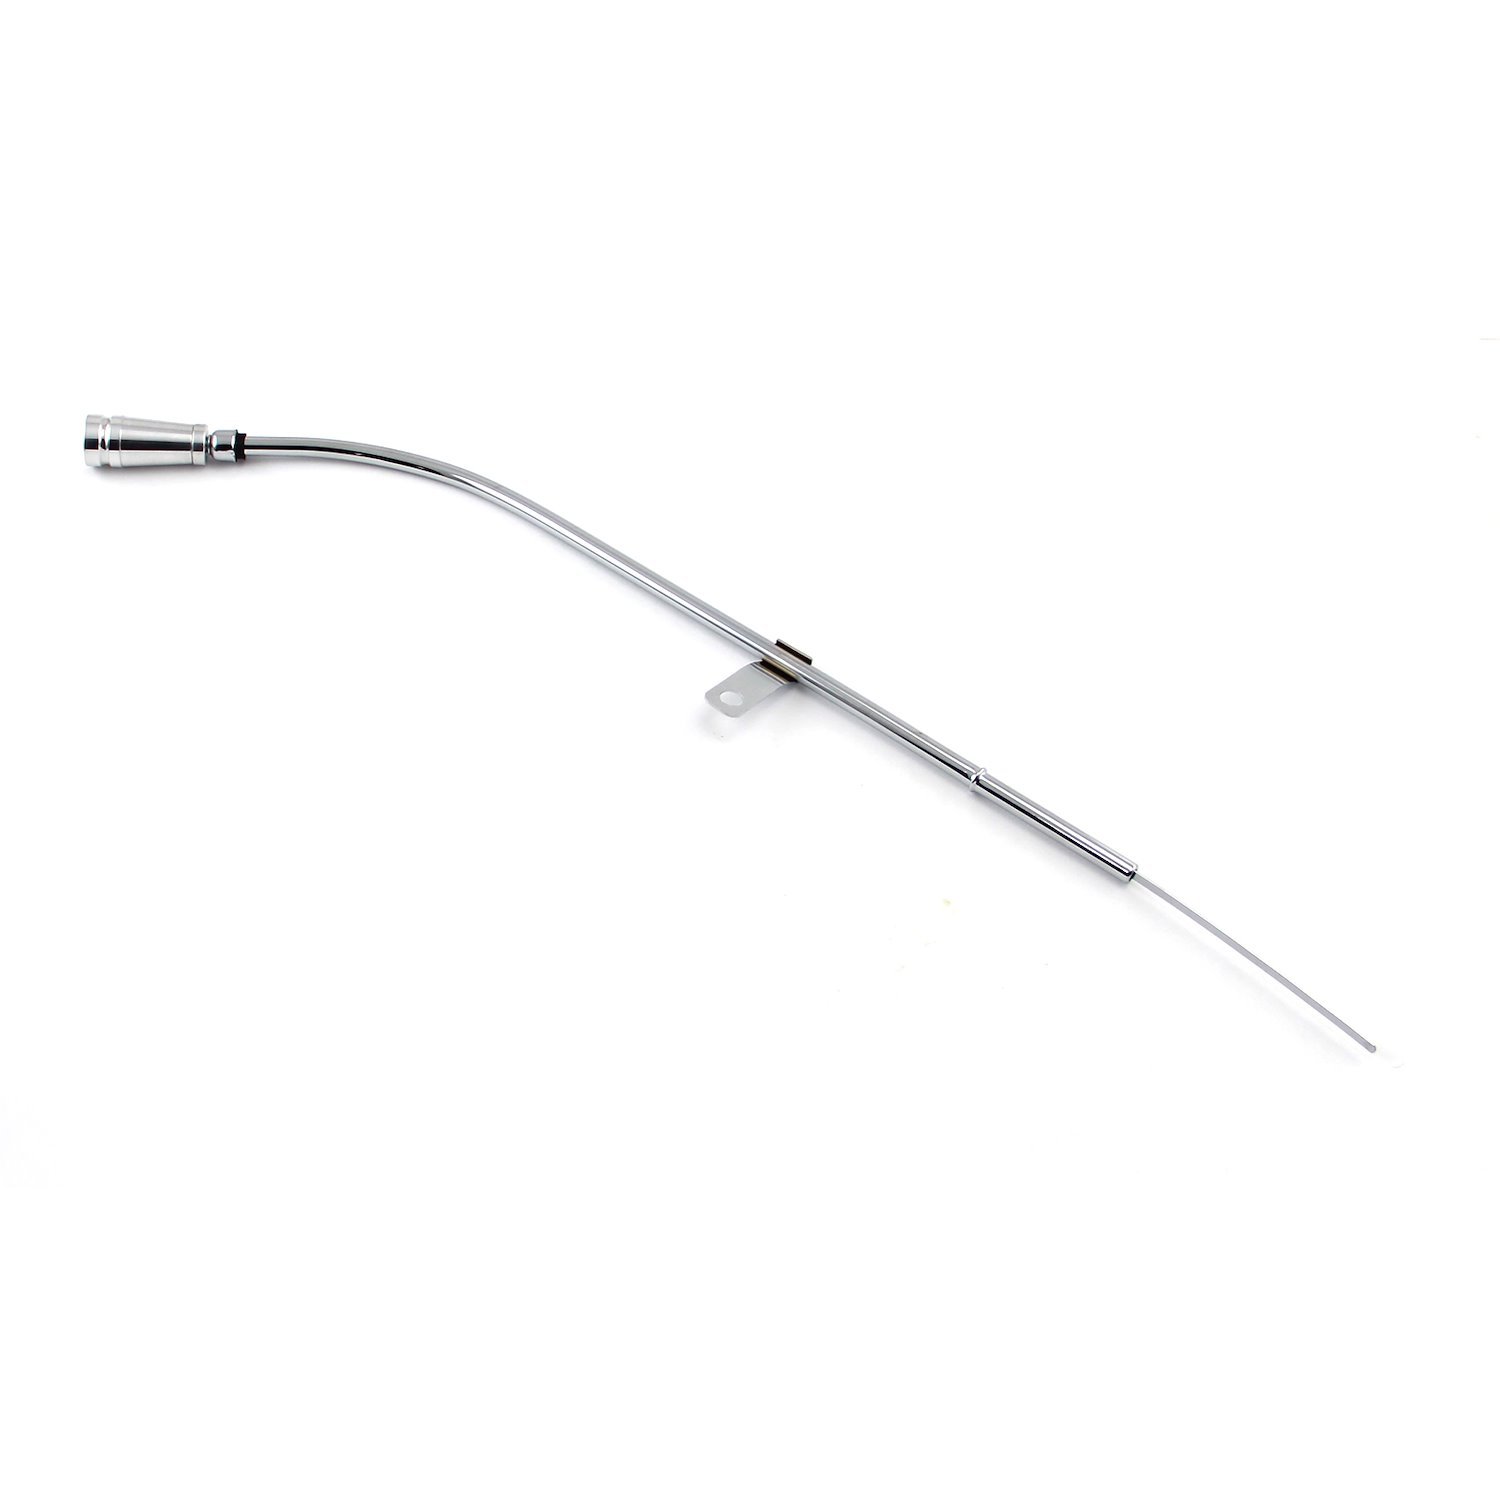 Chevy SBC 350 1980-82 Billet Handle Engine Dipstick and Chrome Tube To